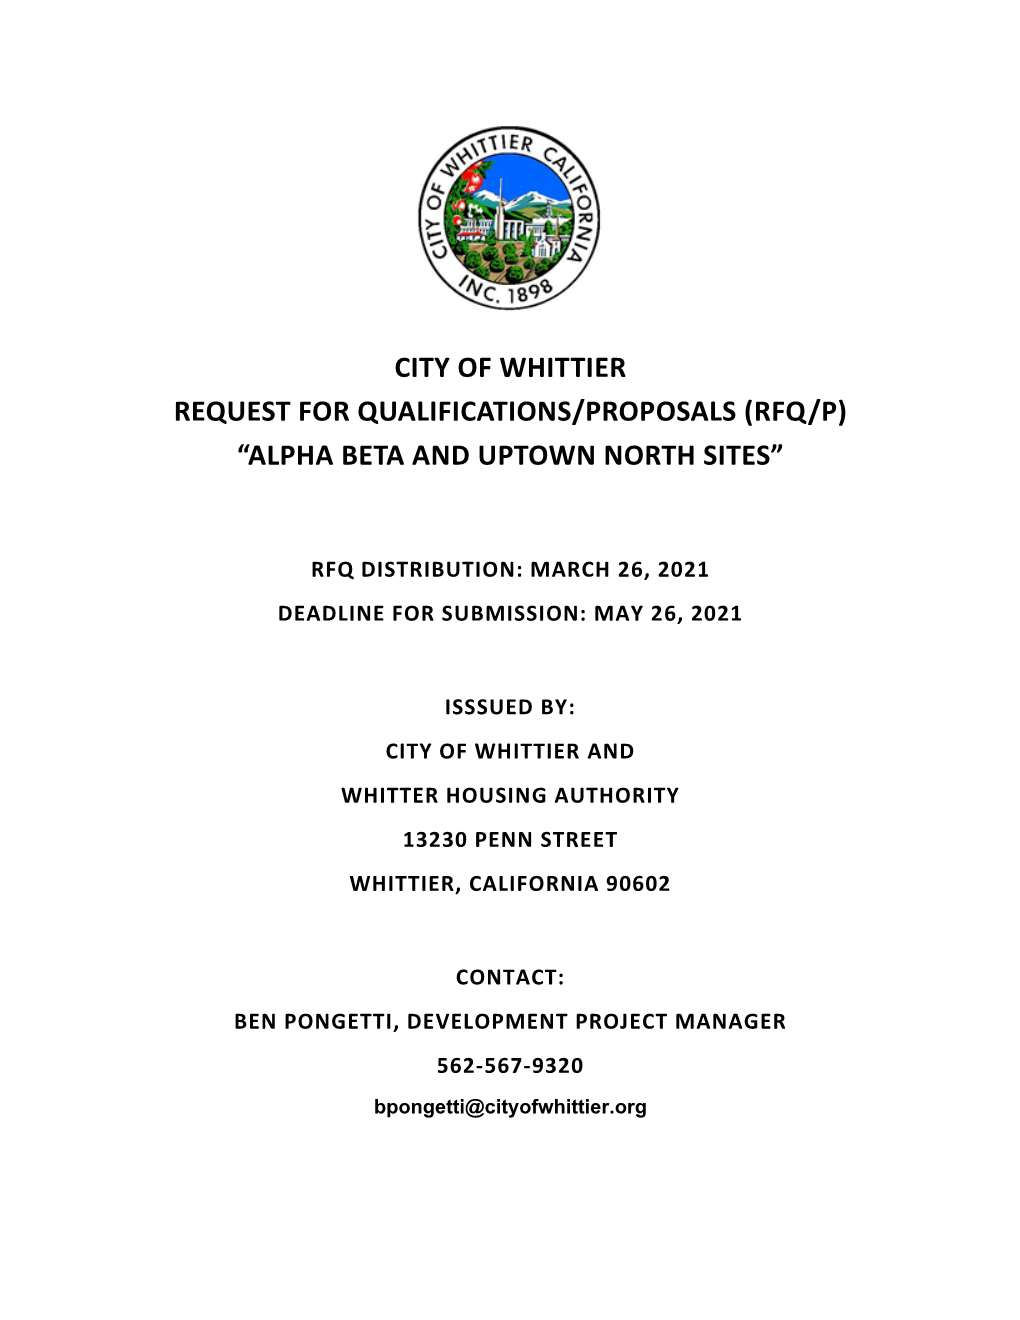 (Rfq/P) “Alpha Beta and Uptown North Sites”